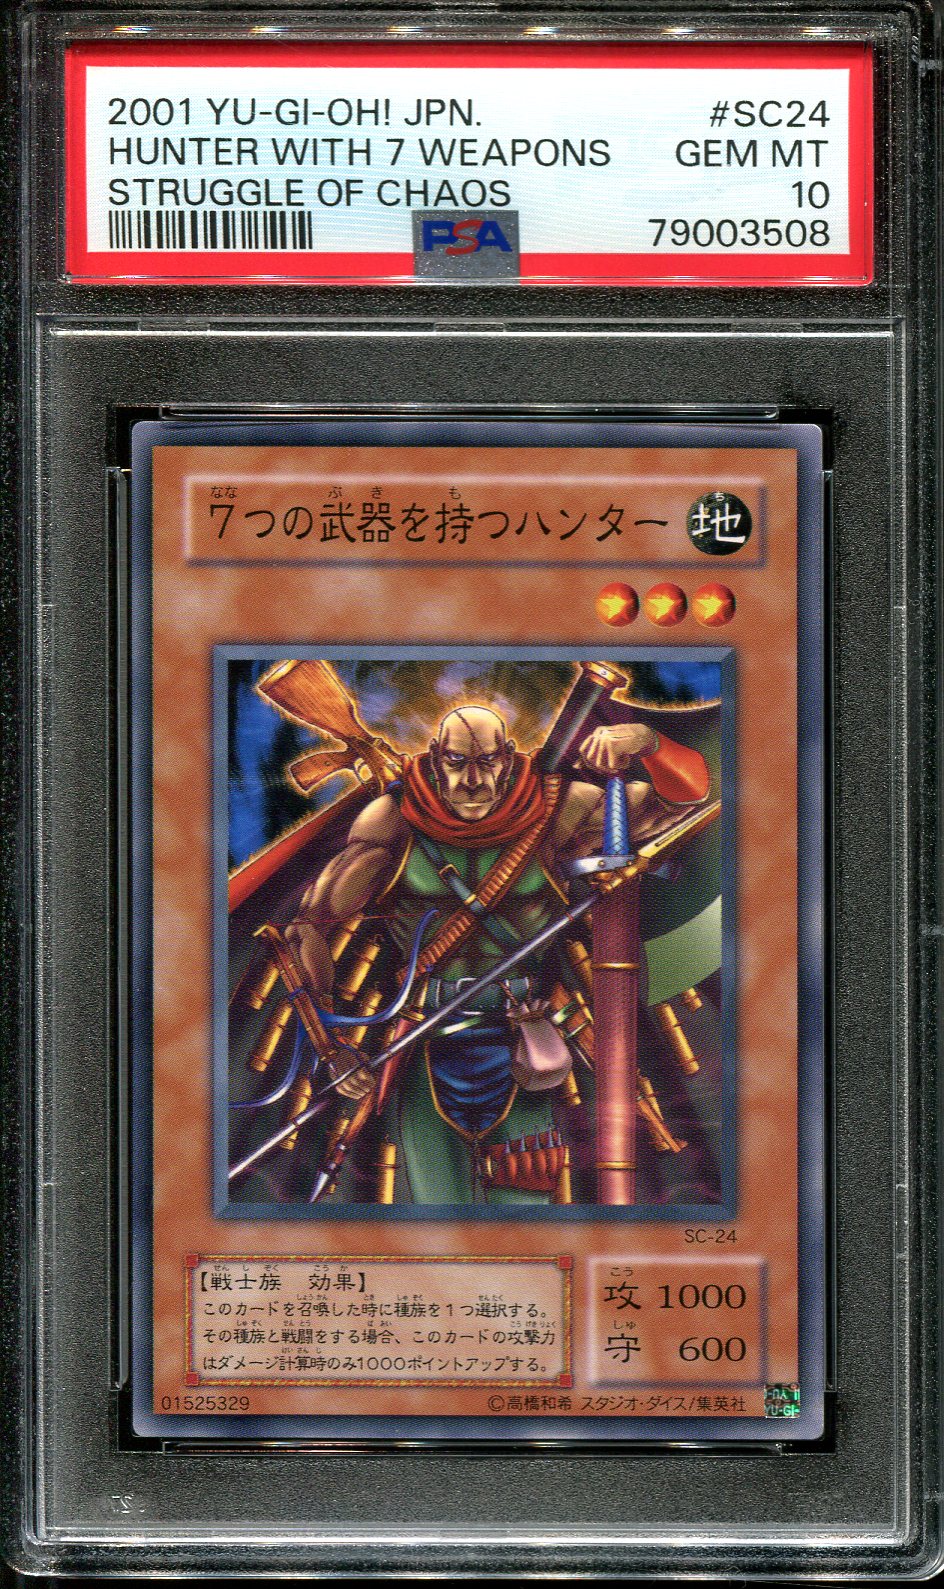 YUGIOH - PSA 10 - HUNTER WITH 7 WEAPONS - SC-24 - STRUGGLE OF CHAOS - JAPANESE OCG